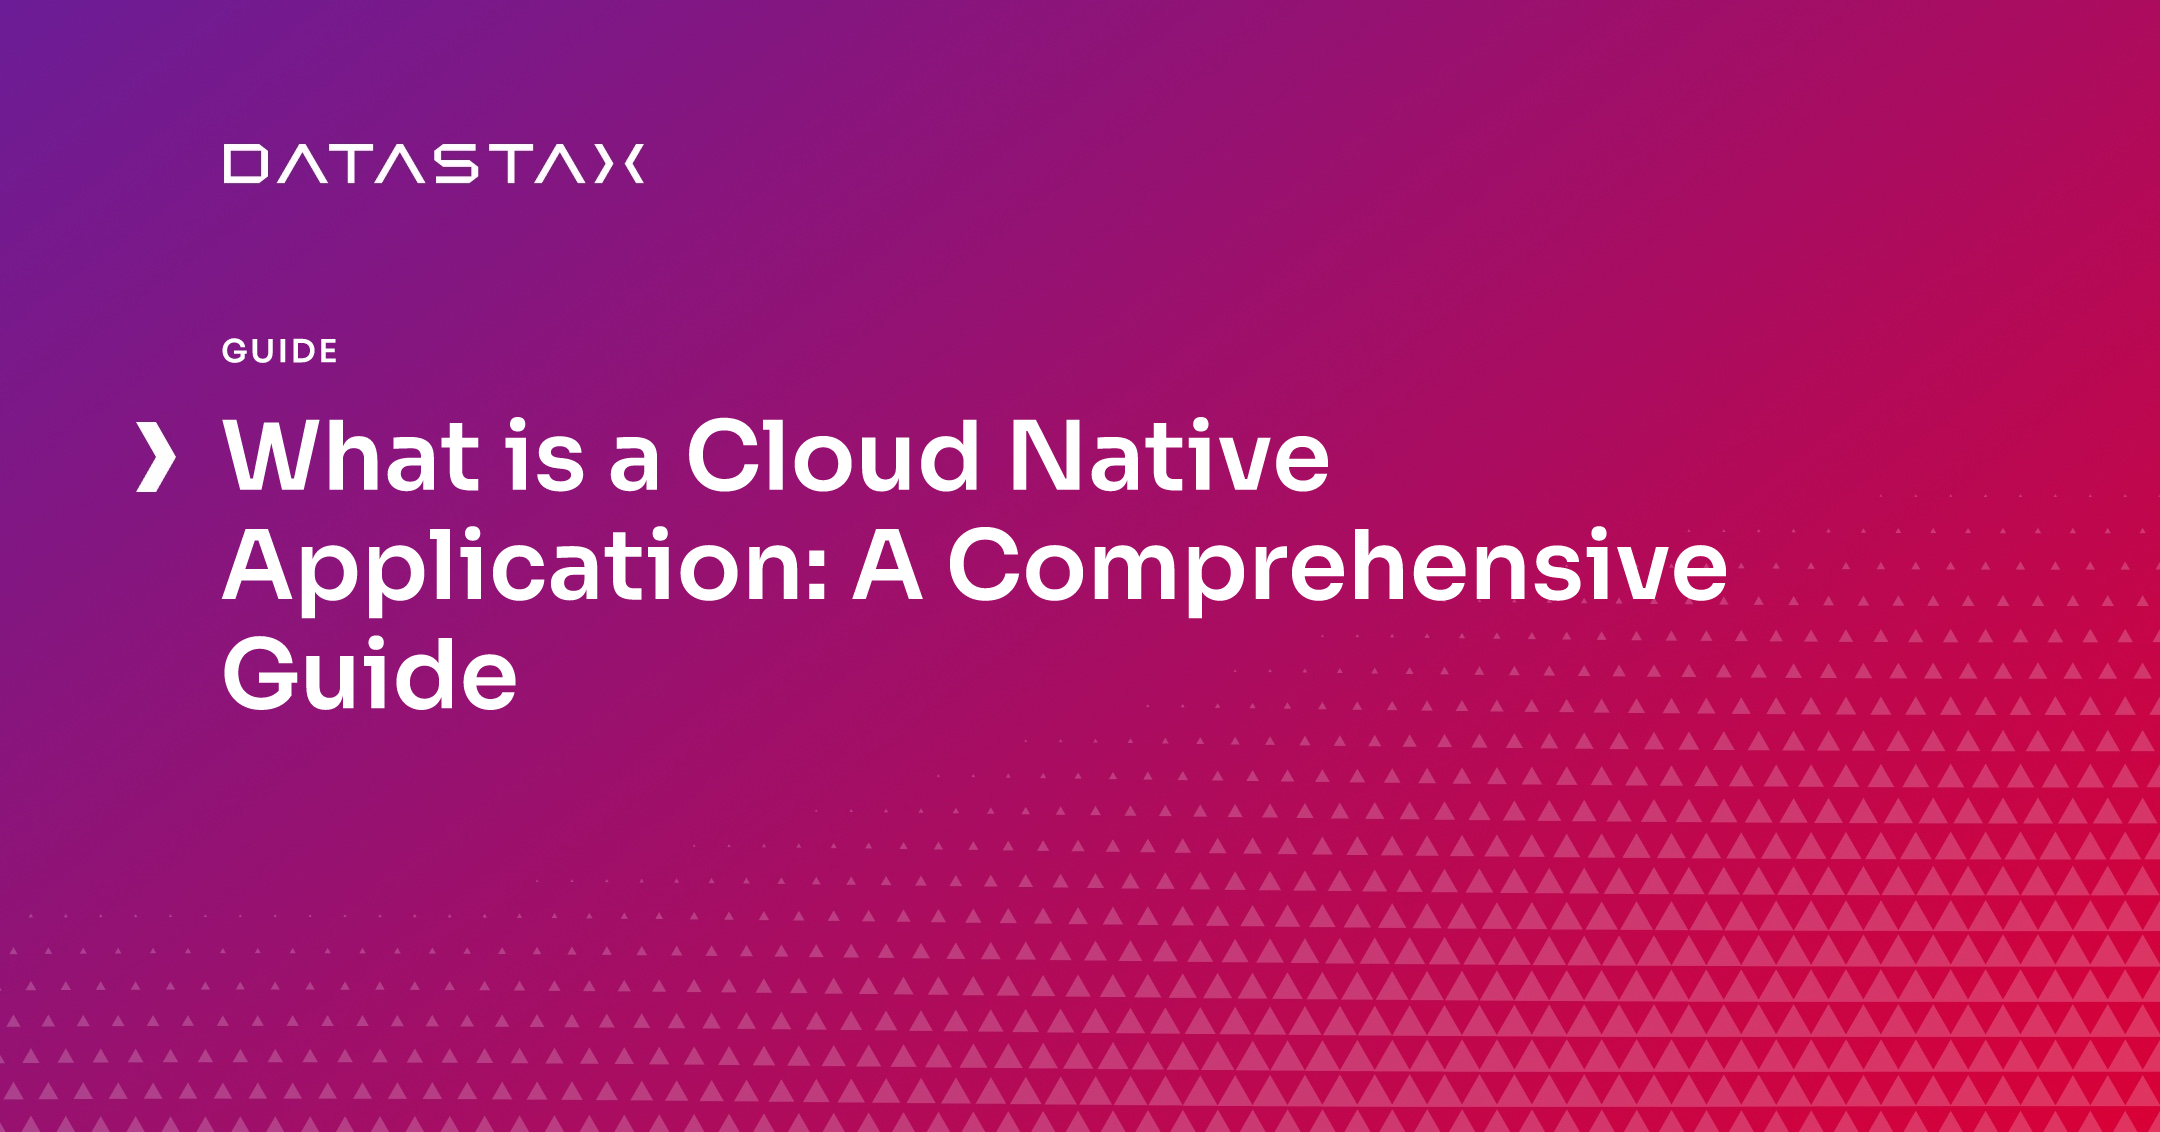 What is a Cloud Native Application: A Comprehensive Guide